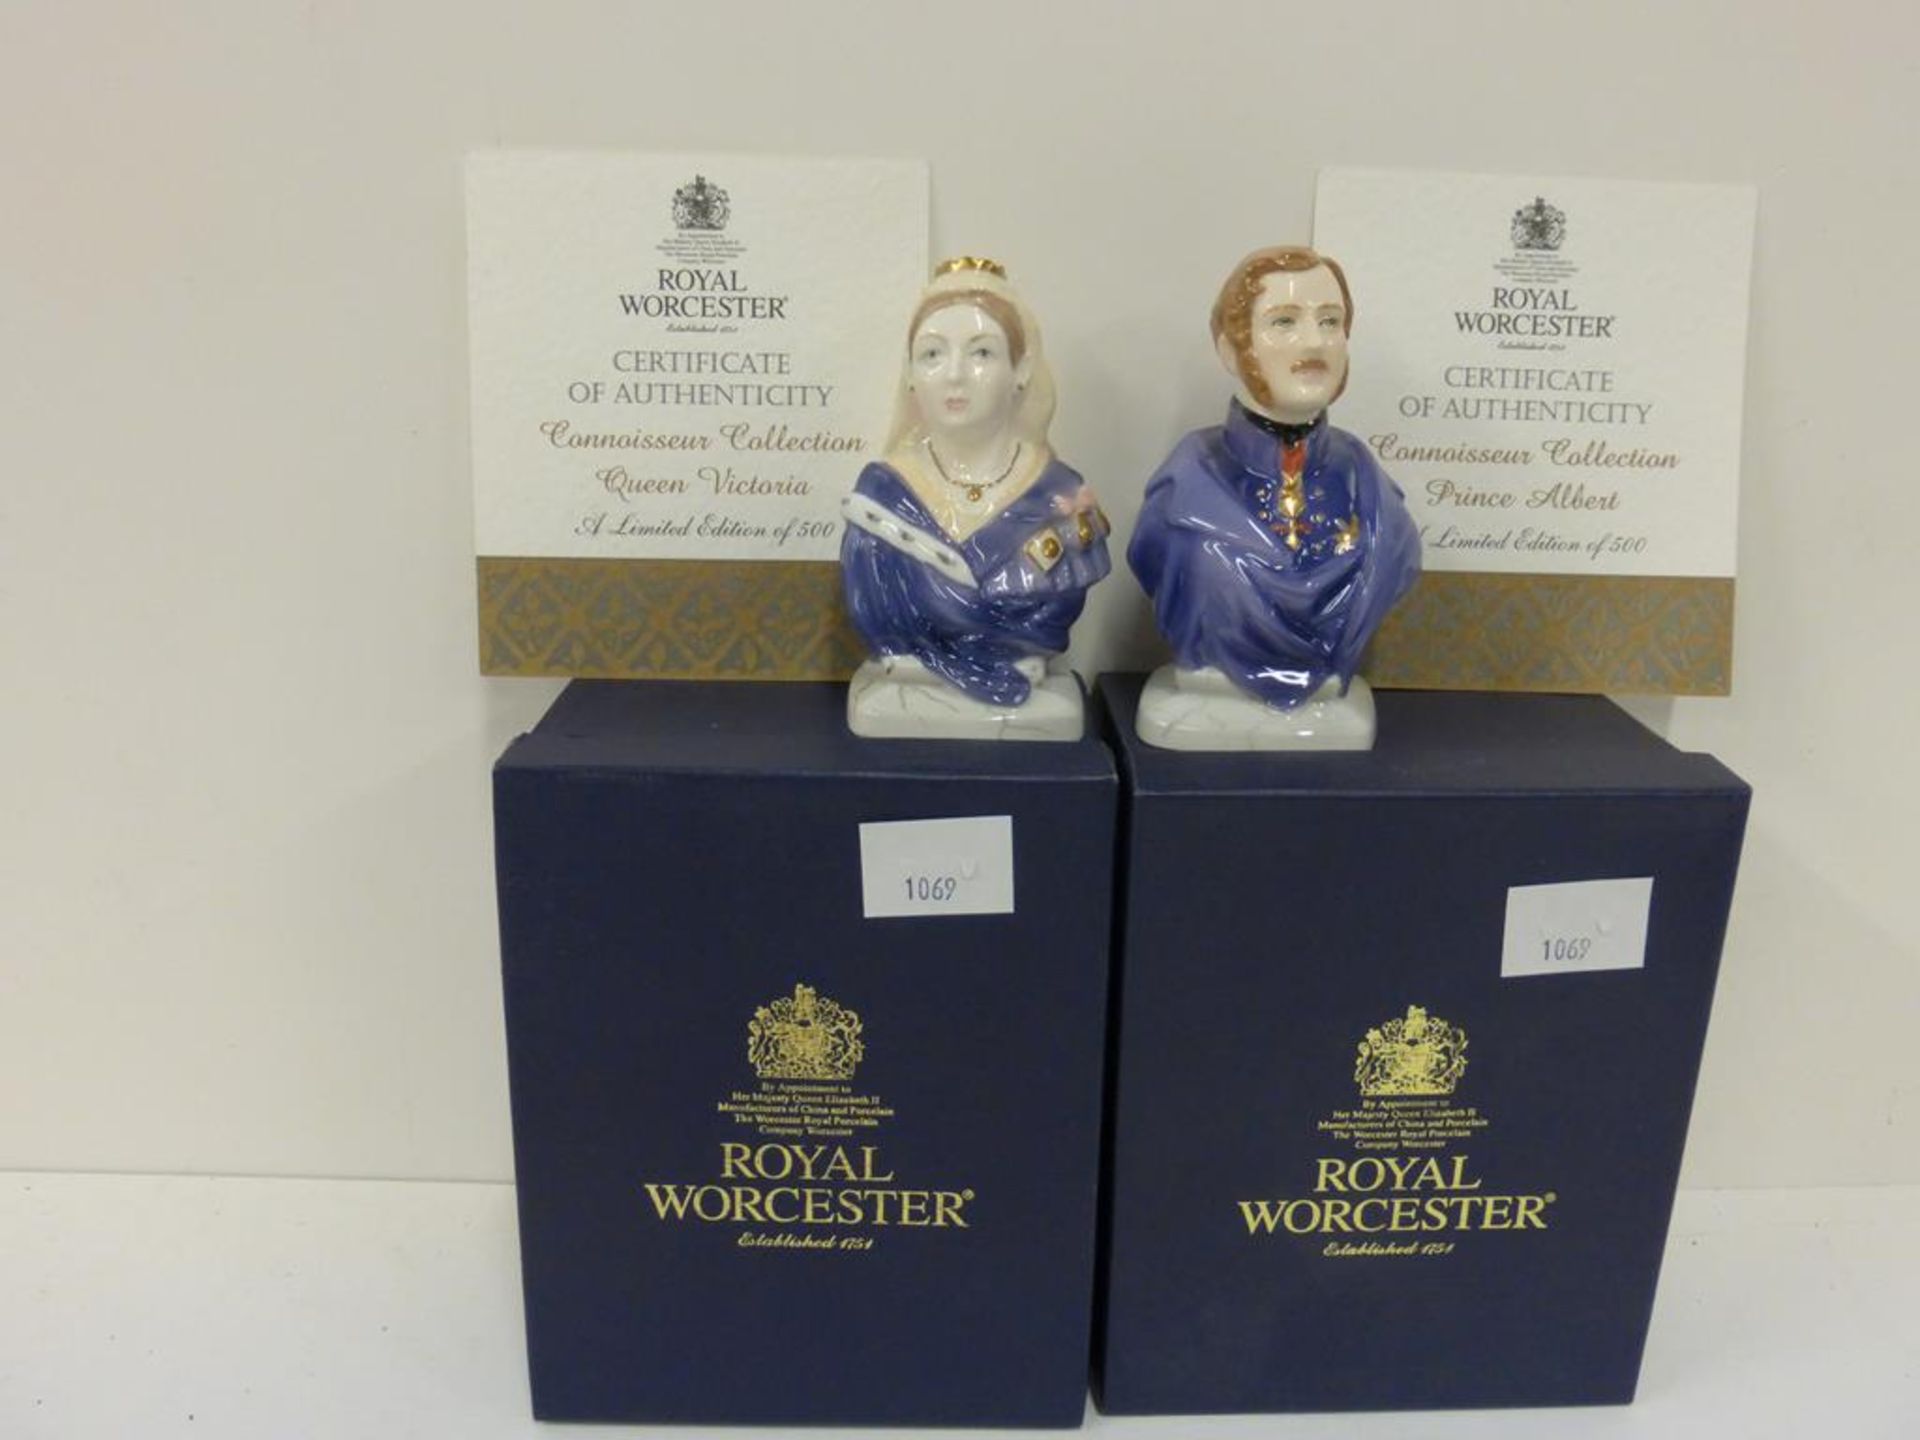 Two Royal Worcester Candle Snuffers - Queen Victoria and Prince Albert. Limited Edition of 500.